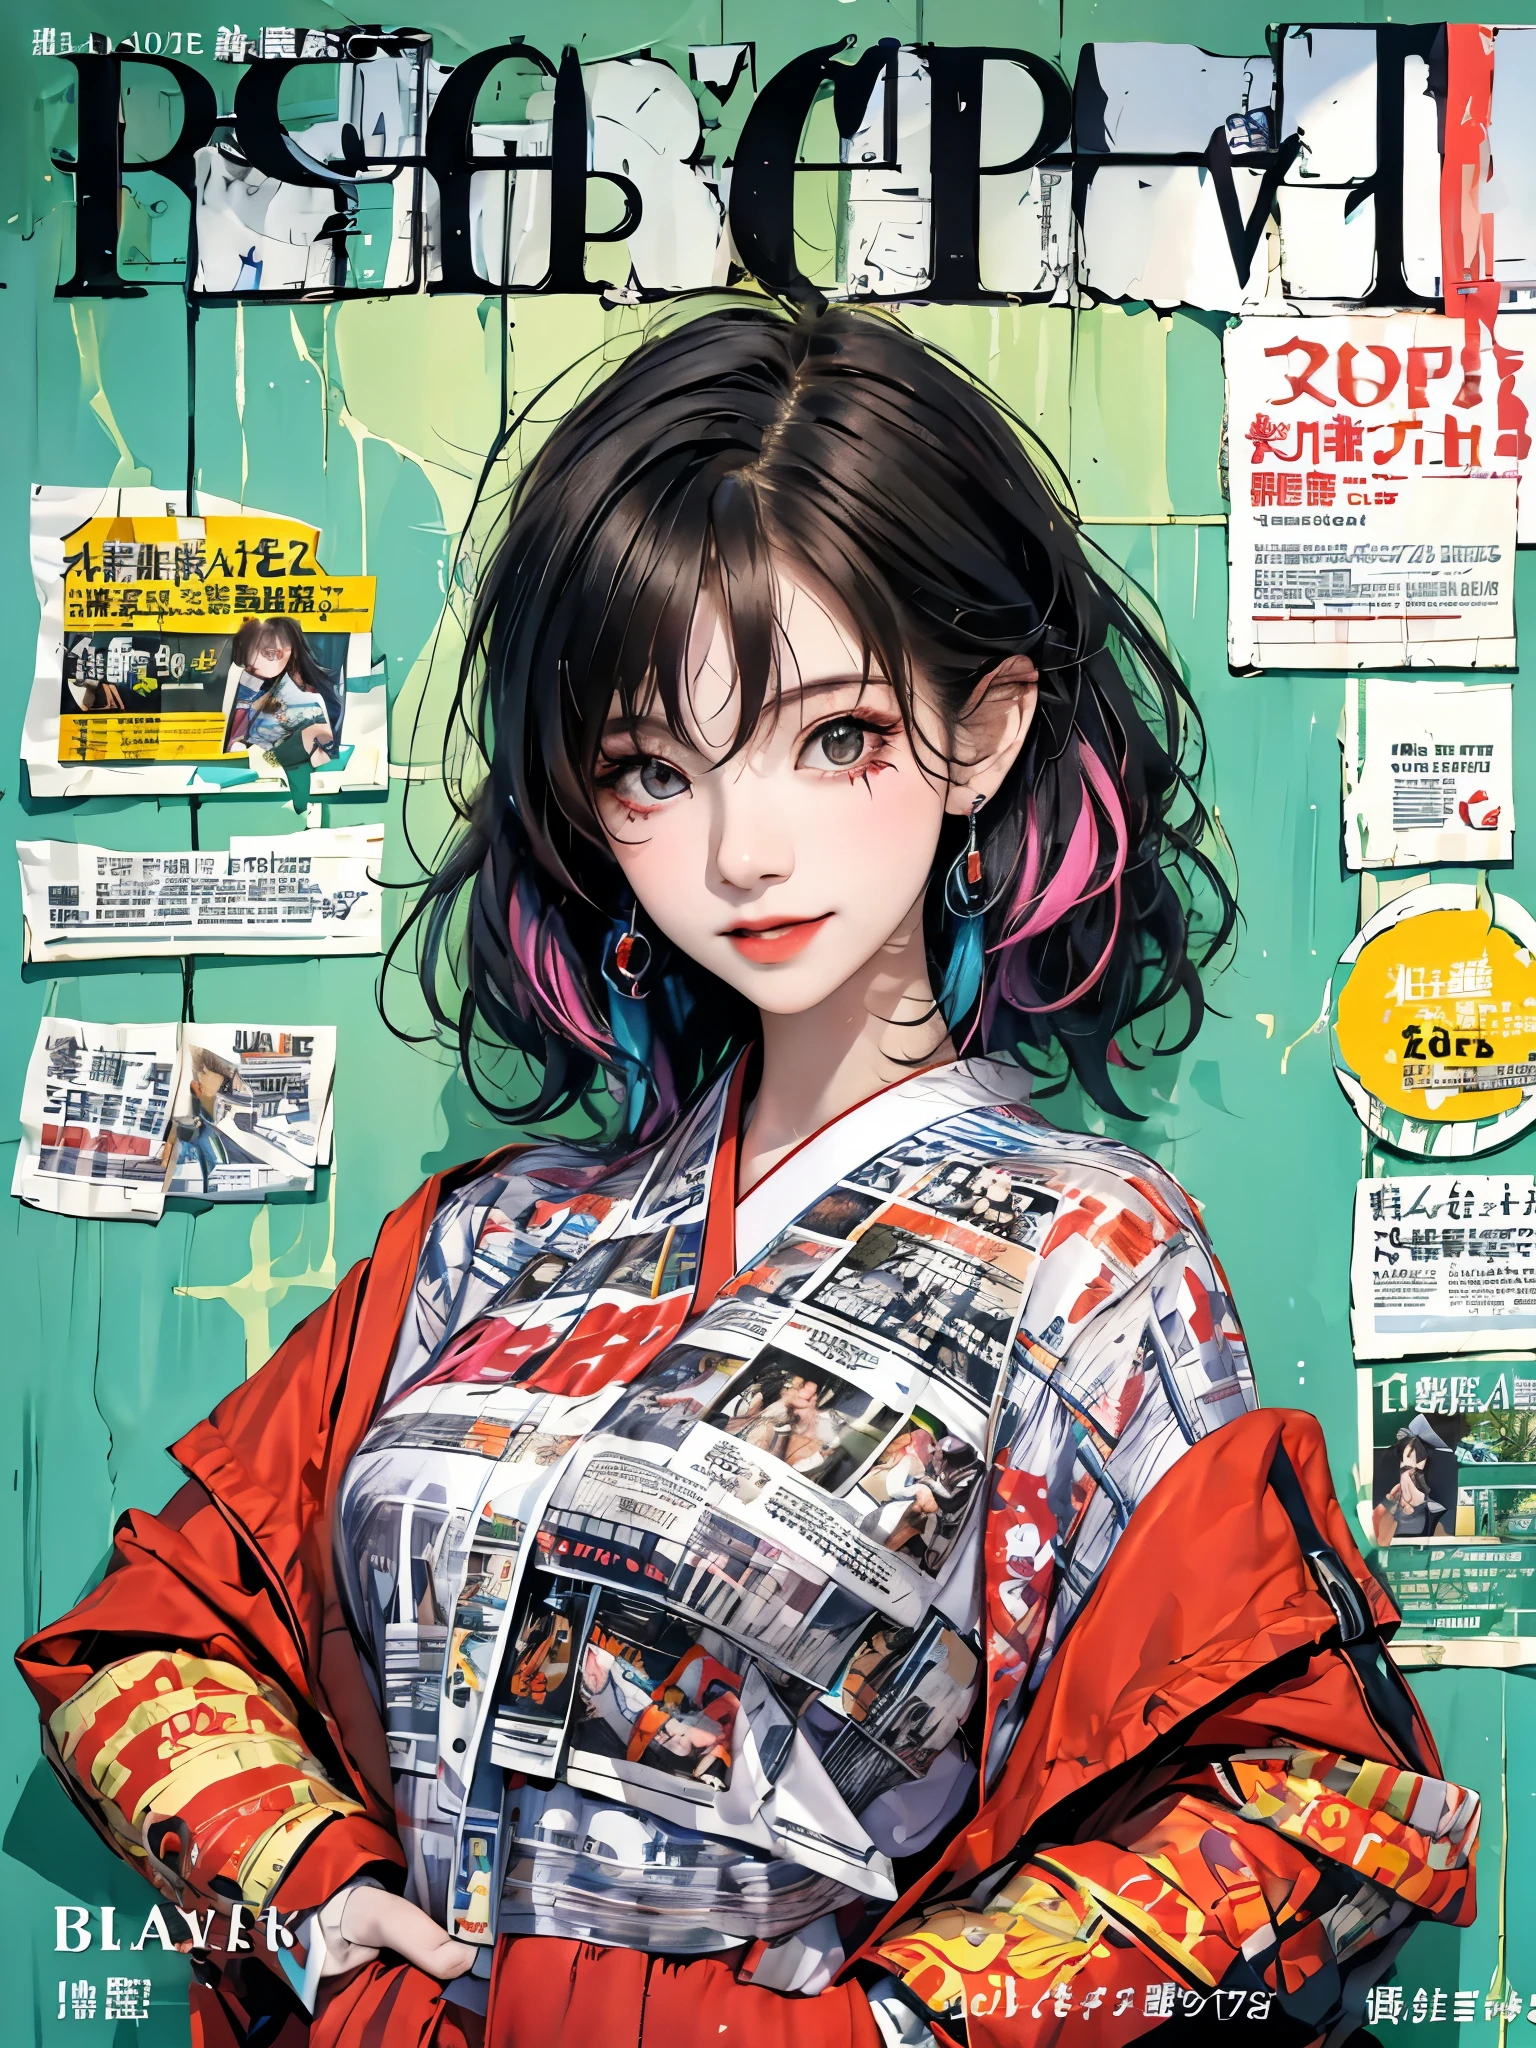 A japanese cute girl idol, with black straight messy hair masterpiece, best quality, joker outfit, colorful neon hair, joker makeup,outdoor, magazine cover ,upper body,